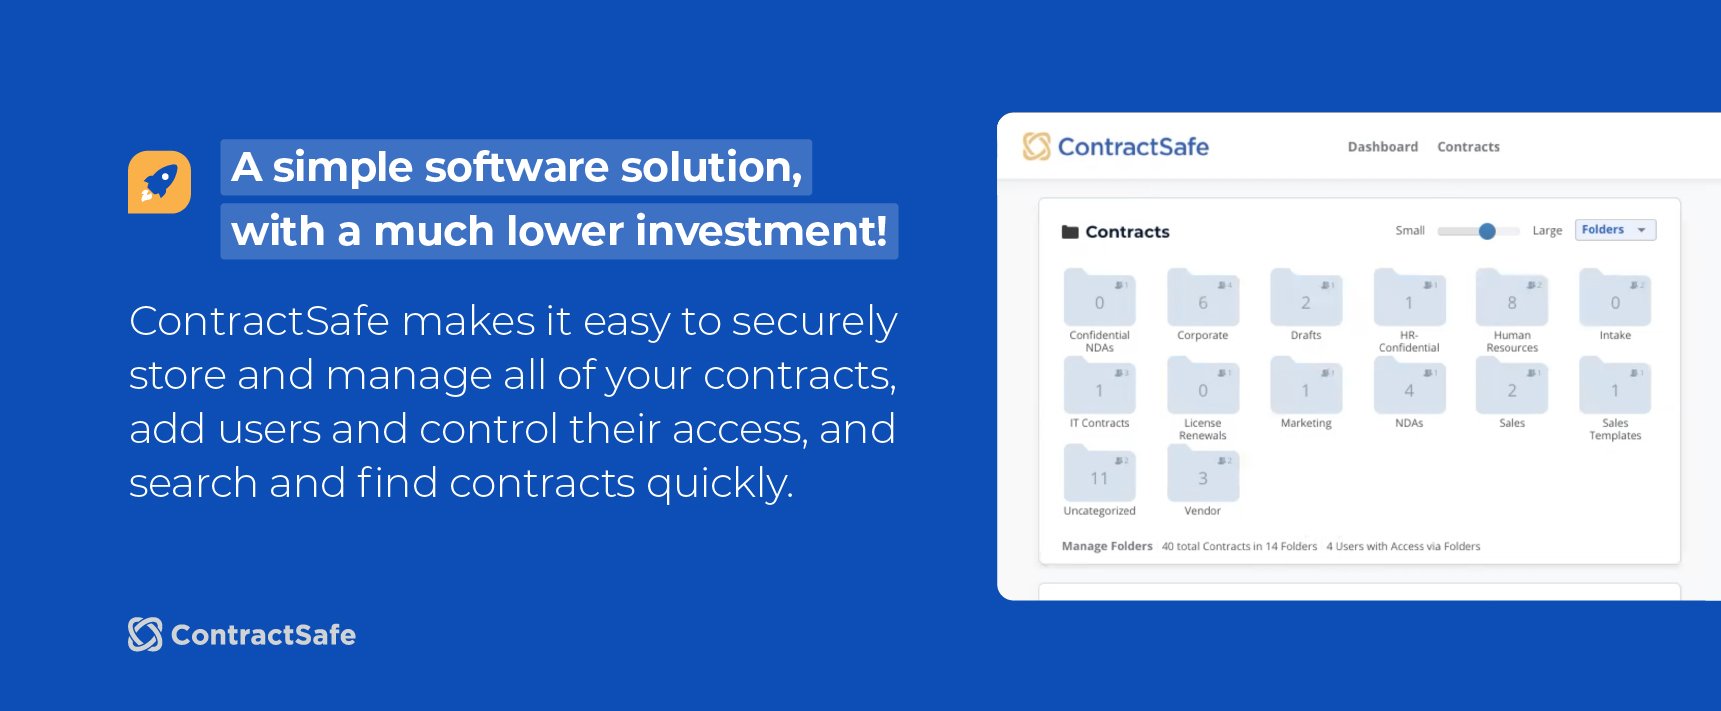 A simple software solution, with a much lower investment! ContractSafe makes it easy to securely store and manage all of your contracts, add users and control their access, and search and find contracts quickly